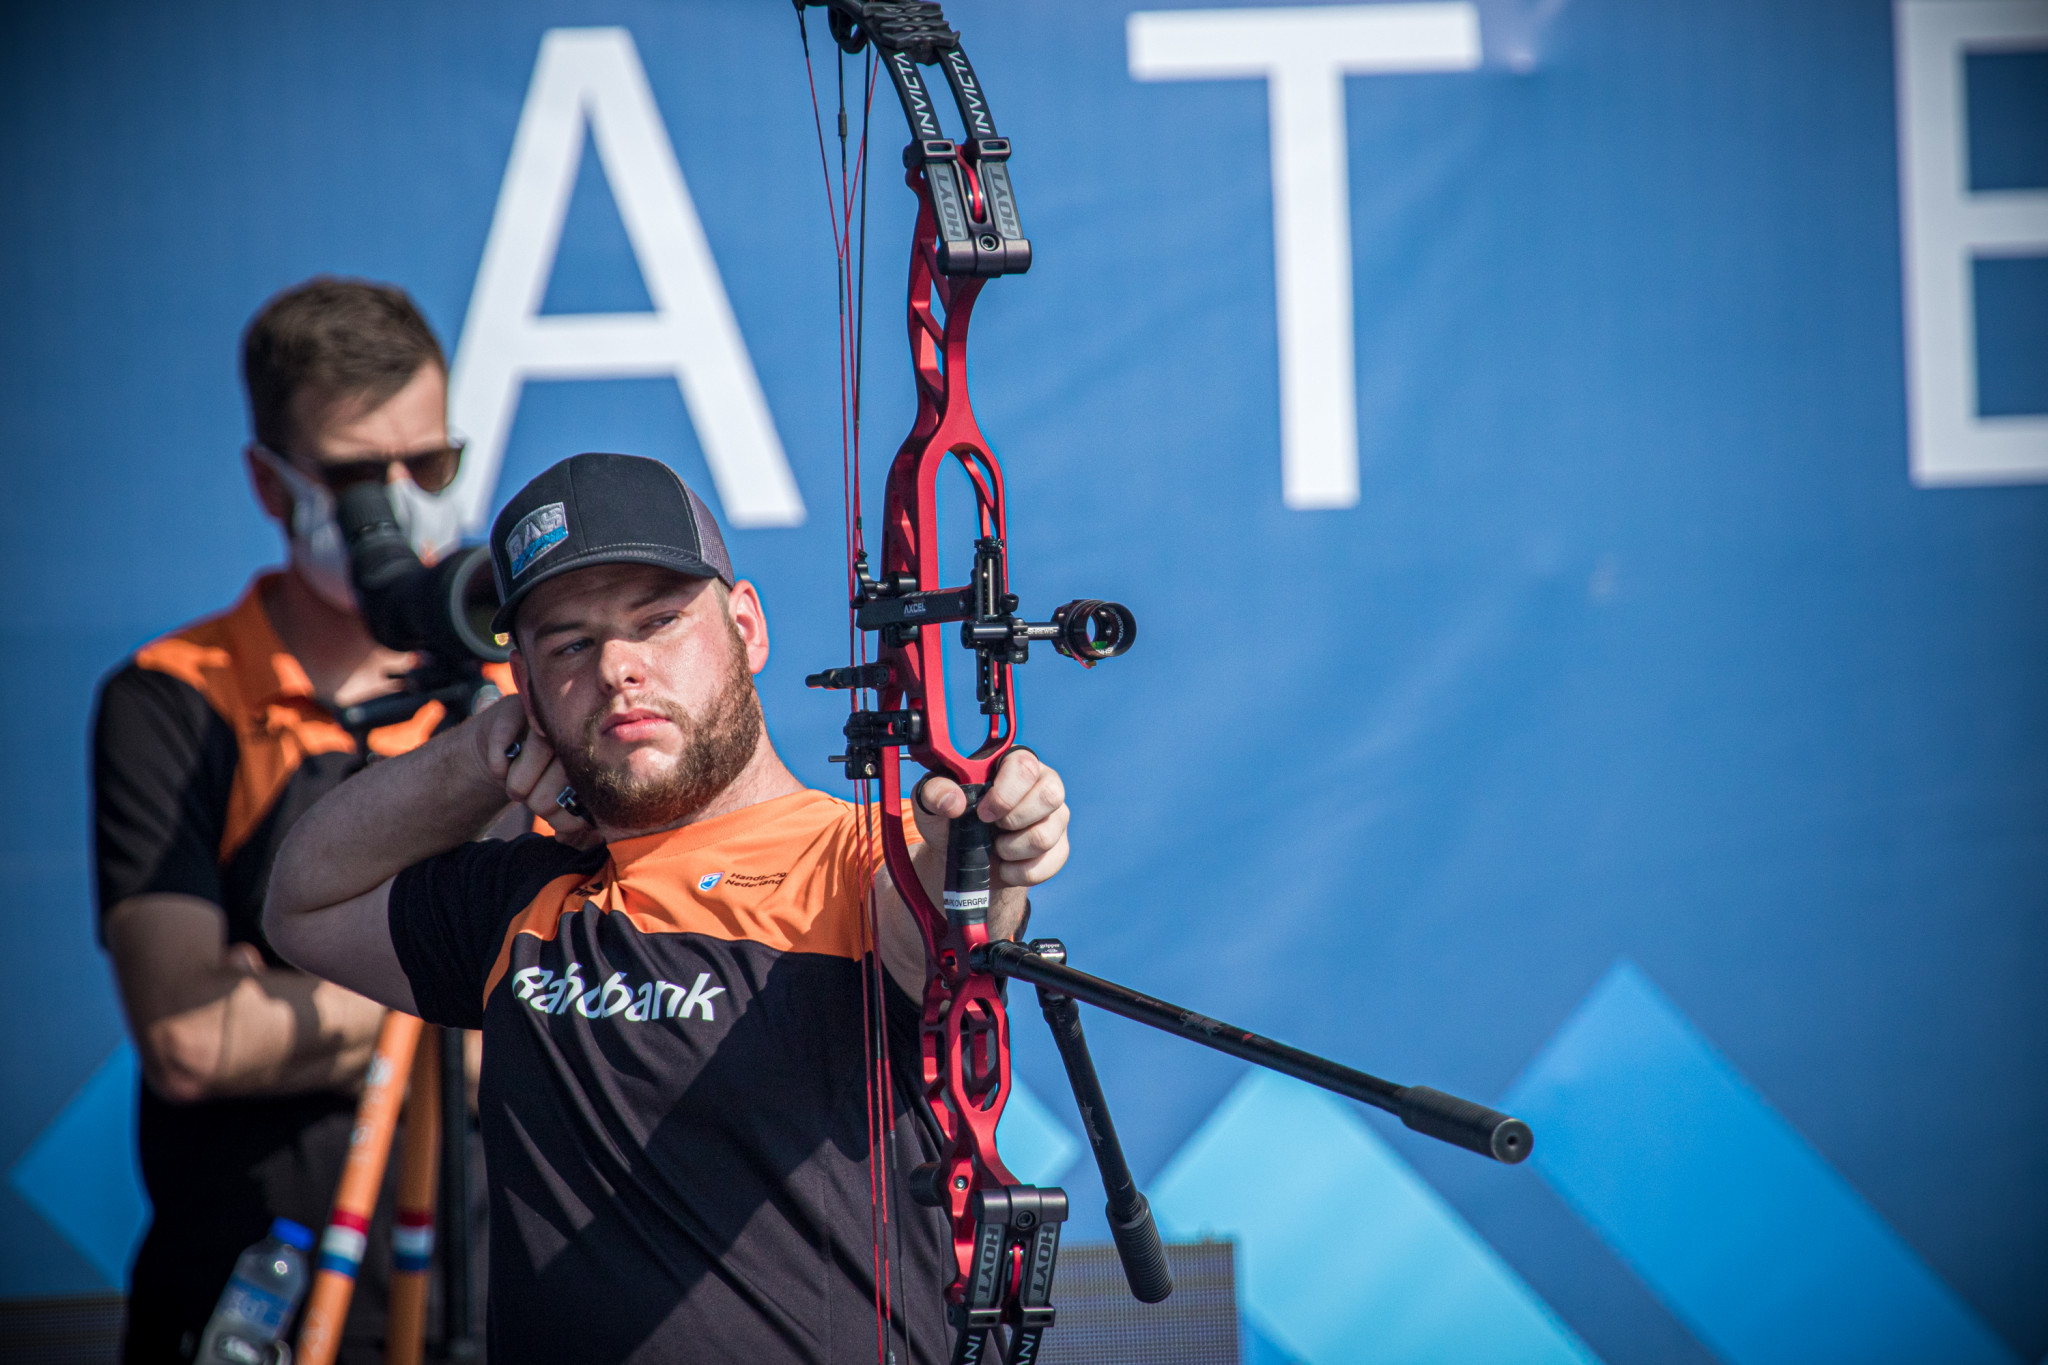 Finalists for mixed team finals at Lausanne Archery World Cup confirmed